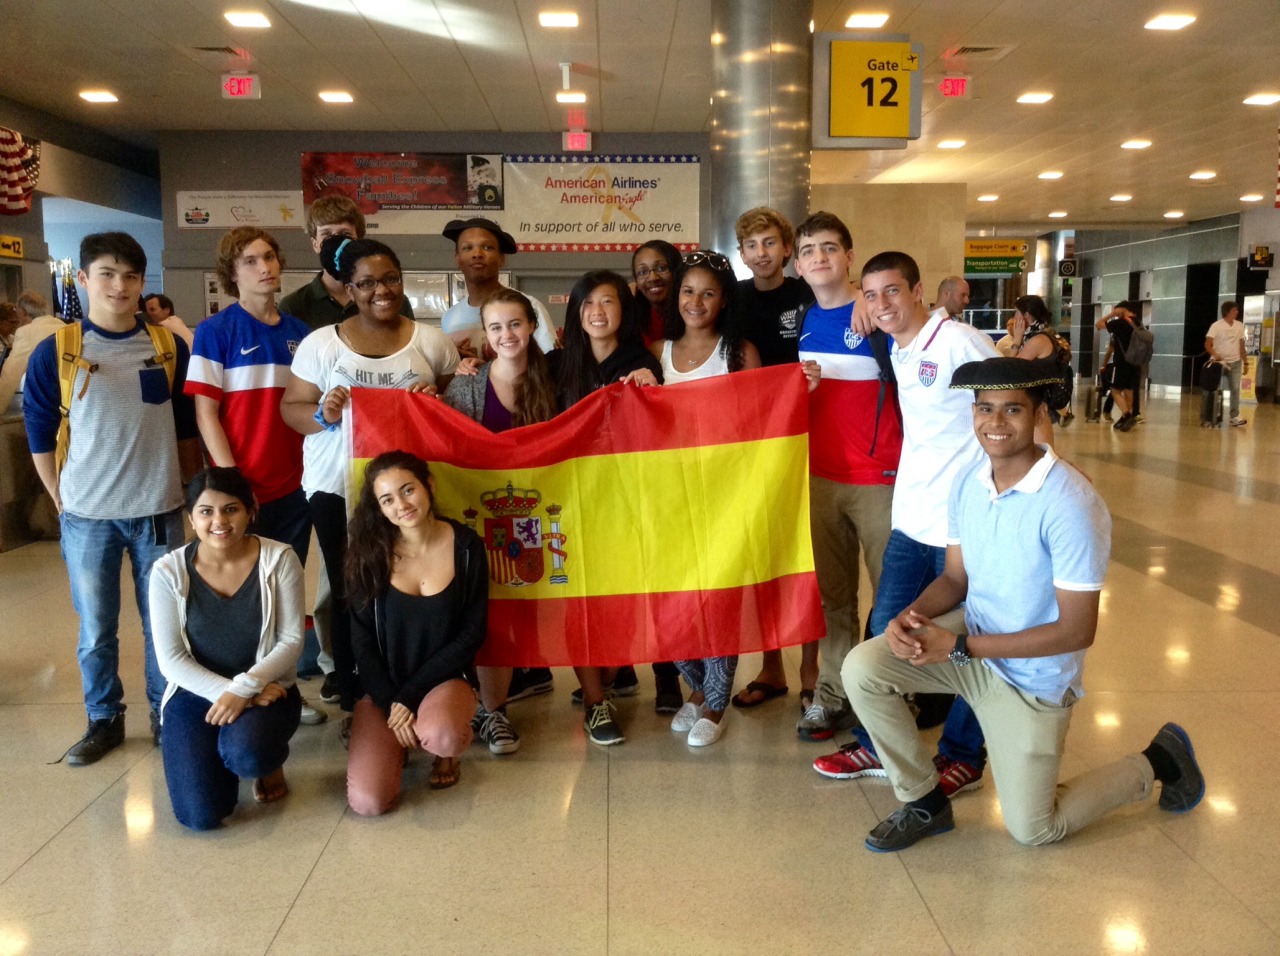 Hola!
We&#8217;re about to embark on our amazing adventure to Spain. Fifteen Experimenters and their two Group Leaders will spend 4 weeks immersed in Spain&#8217;s language and culture. We land tomorrow morning in the capital, Madrid, where we will get oriented and visit the famous sites, such as the Prado art museum and El Palacio Real (royal palace). Then we&#8217;ll travel south to Granada and Cordoba. Stay tuned for more pictures and posts in the coming weeks.
Vamos ya! 
Wish us feliz viaje!